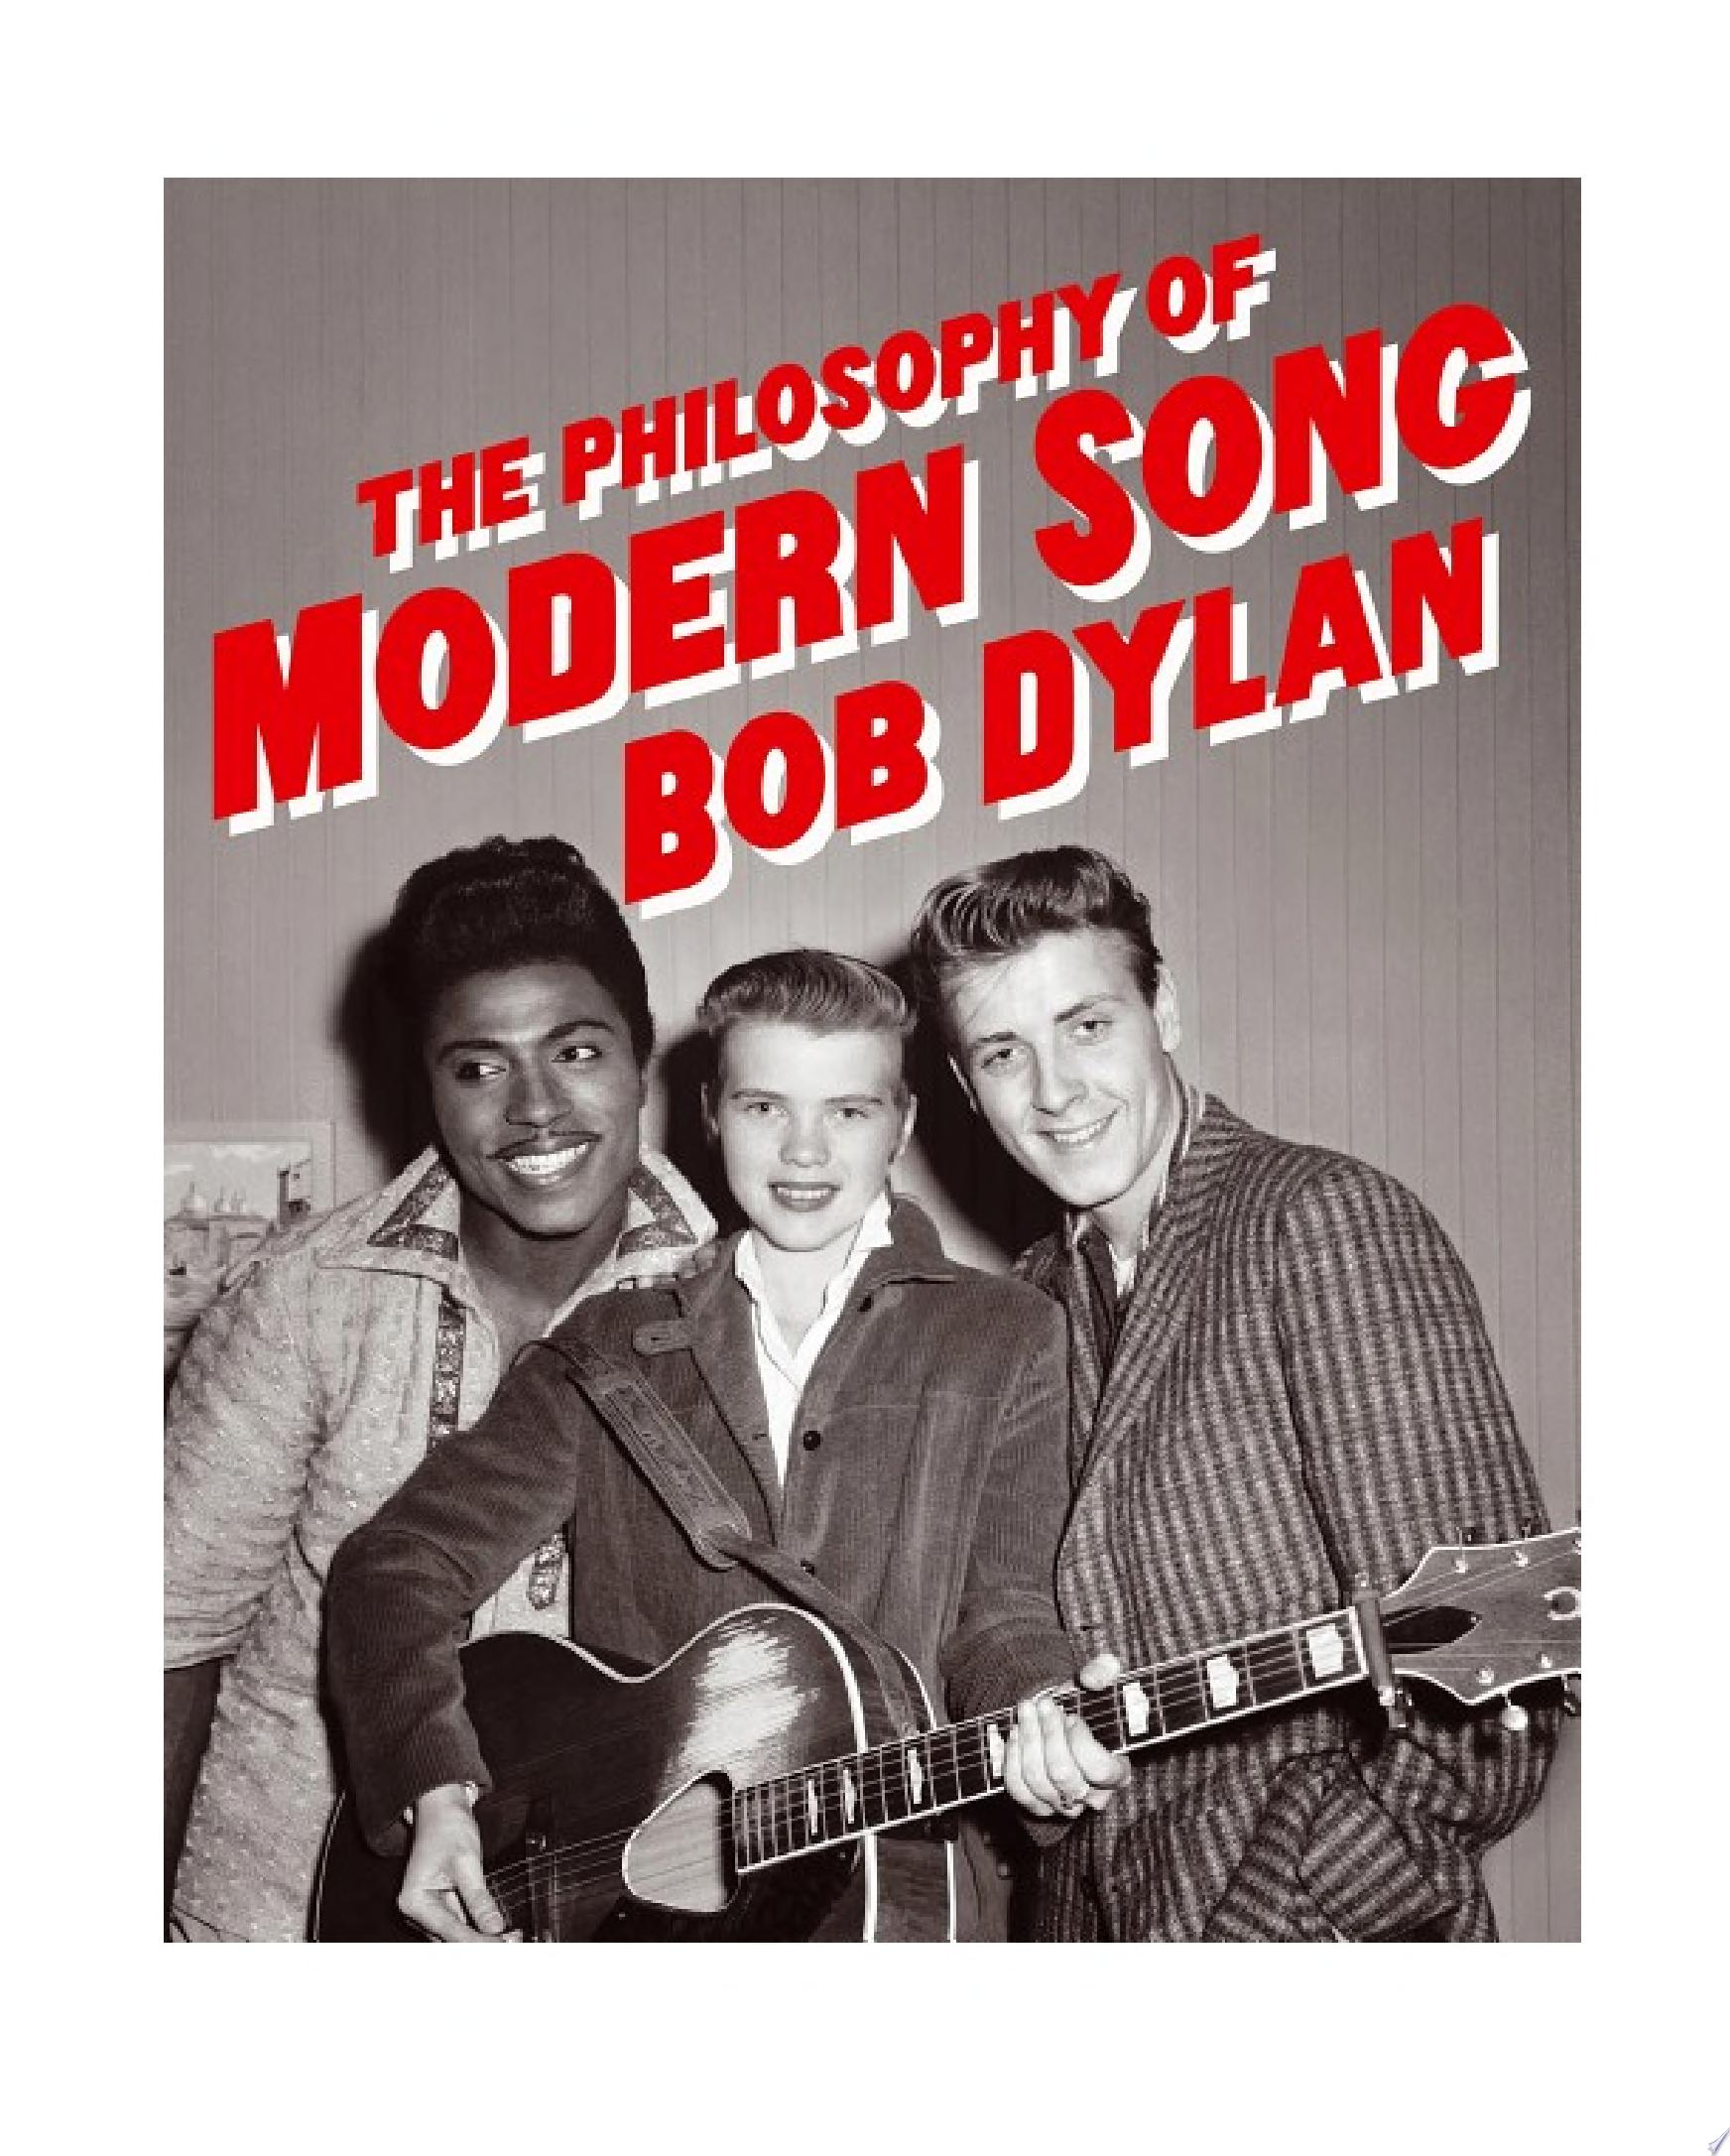 Image for "The Philosophy of Modern Song"